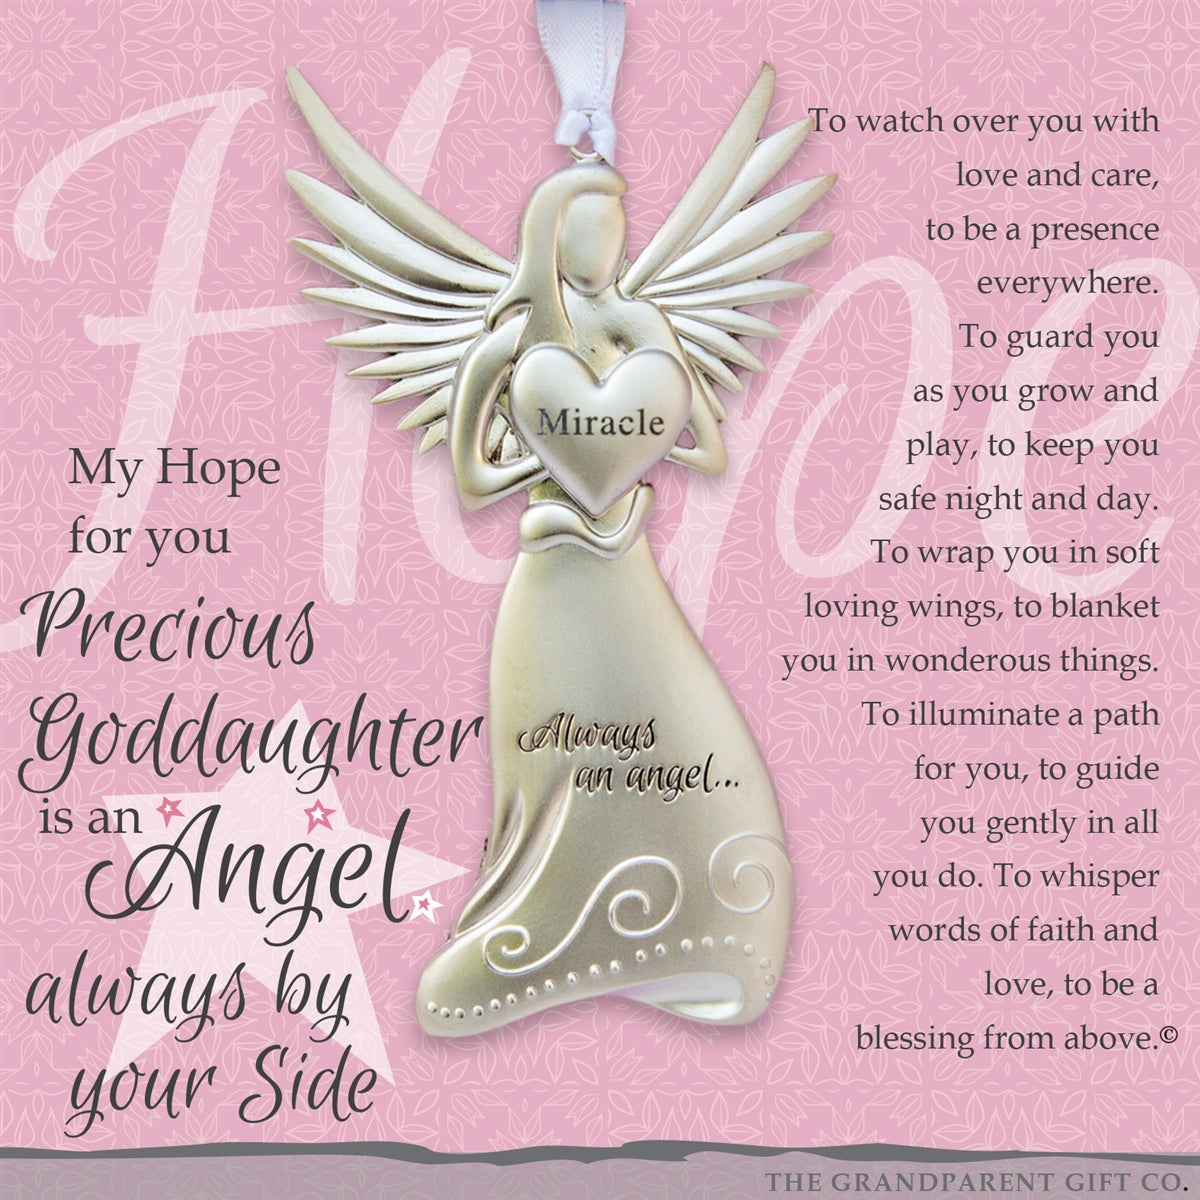 Goddaughter Gift - 4" metal miracle angel ornament with "Precious Goddaughter" poem in white box with clear lid.